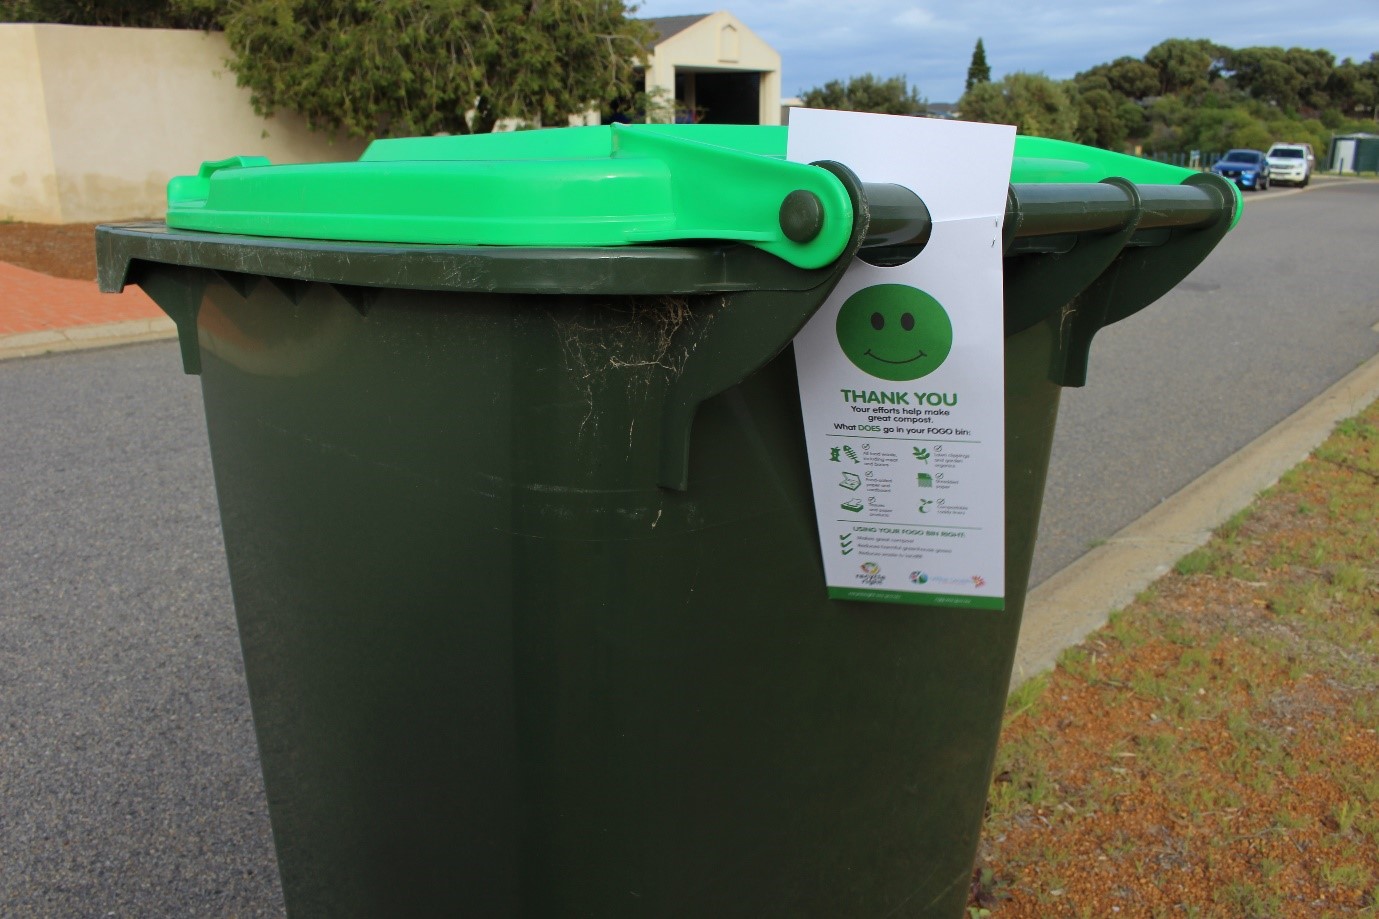 FOGO Bin with green tag indicating the household is doing a great job at separating FOGO waste from general household rubbish.